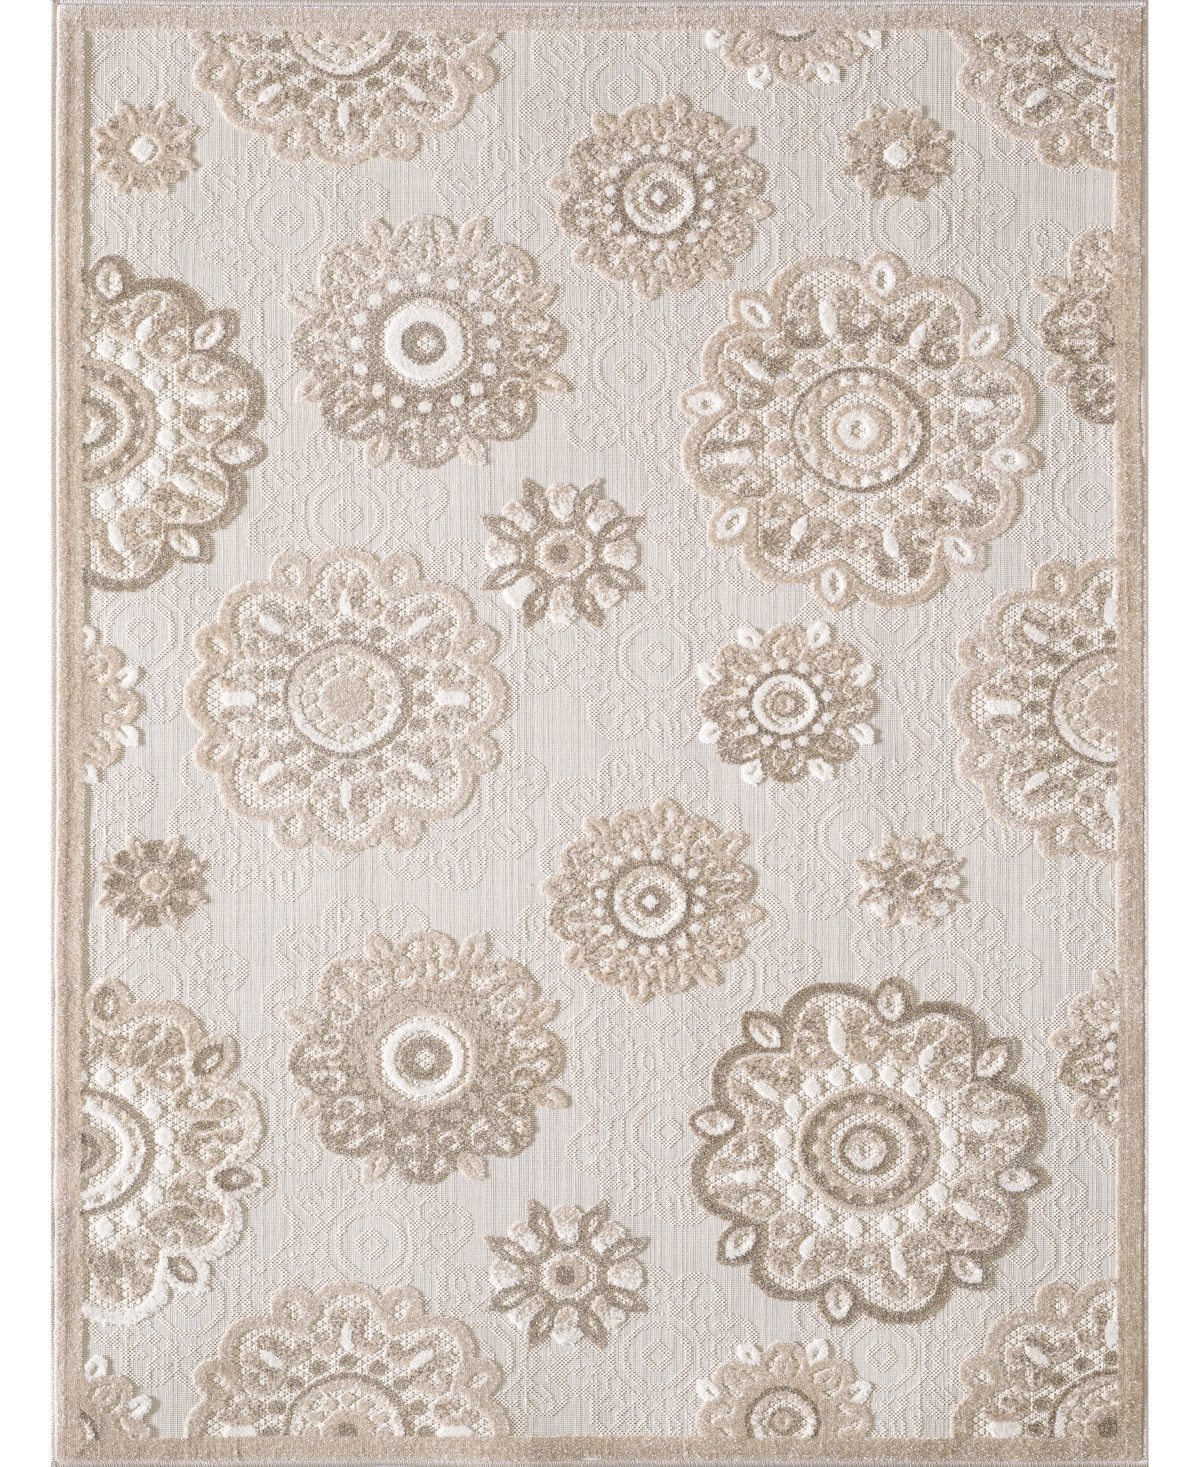 Kas Calla 6933 6'7in x 9' Area Rug - Taupe